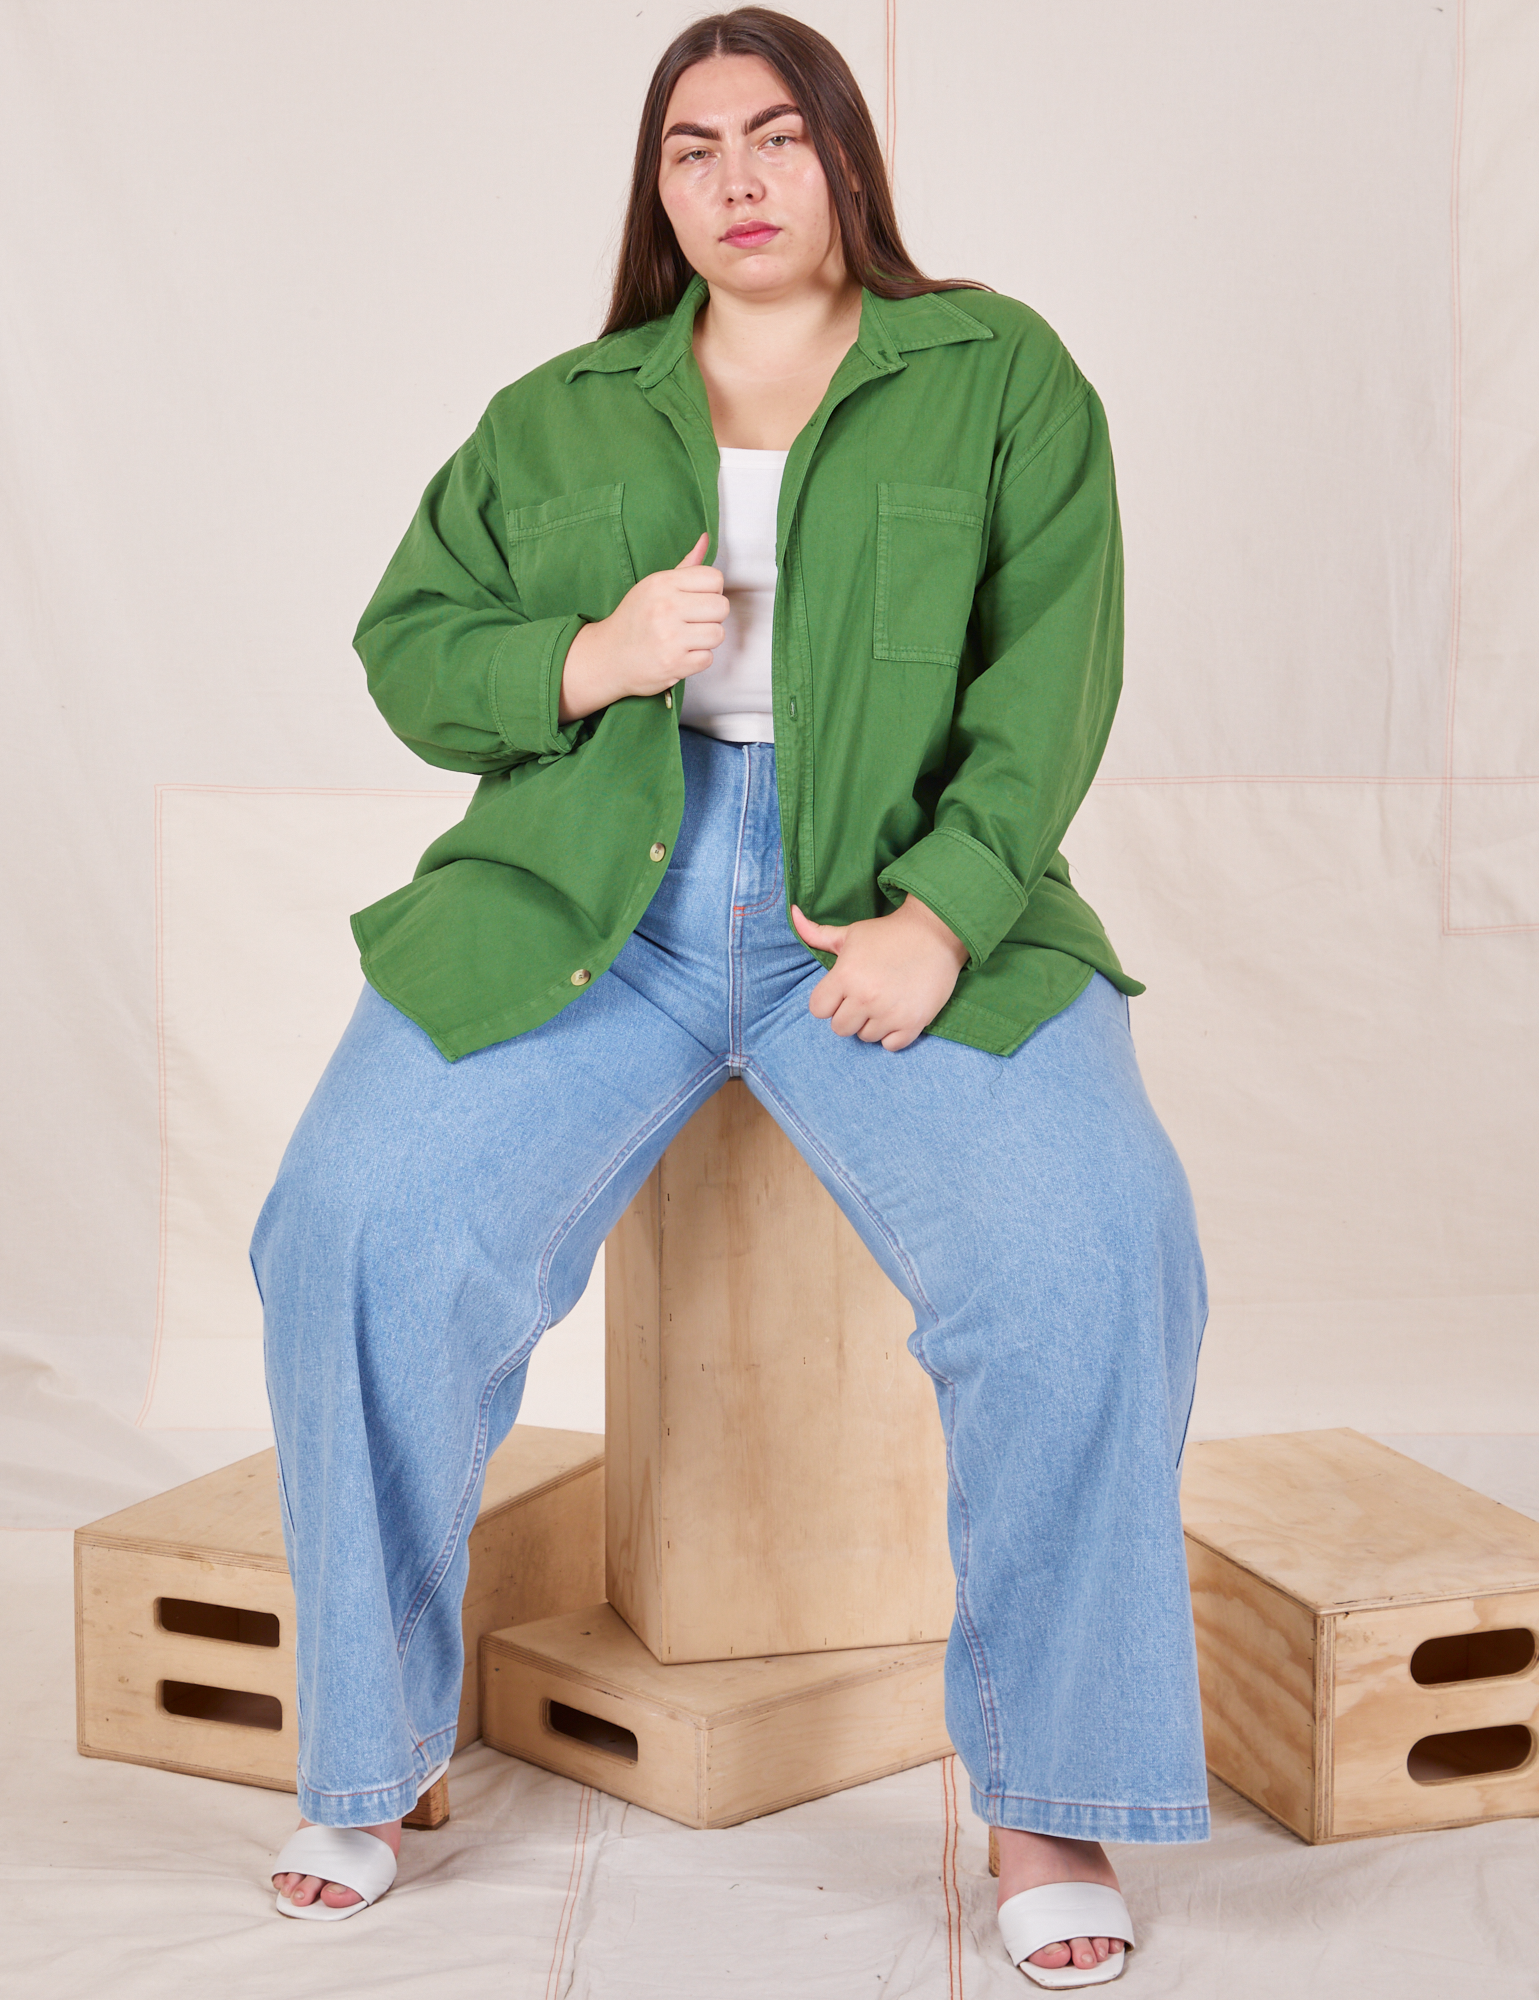 Marielena is wearing Oversize Overshirt in Lawn Green, vintage off-white Cropped Tank Top and light wash Sailor Jeans